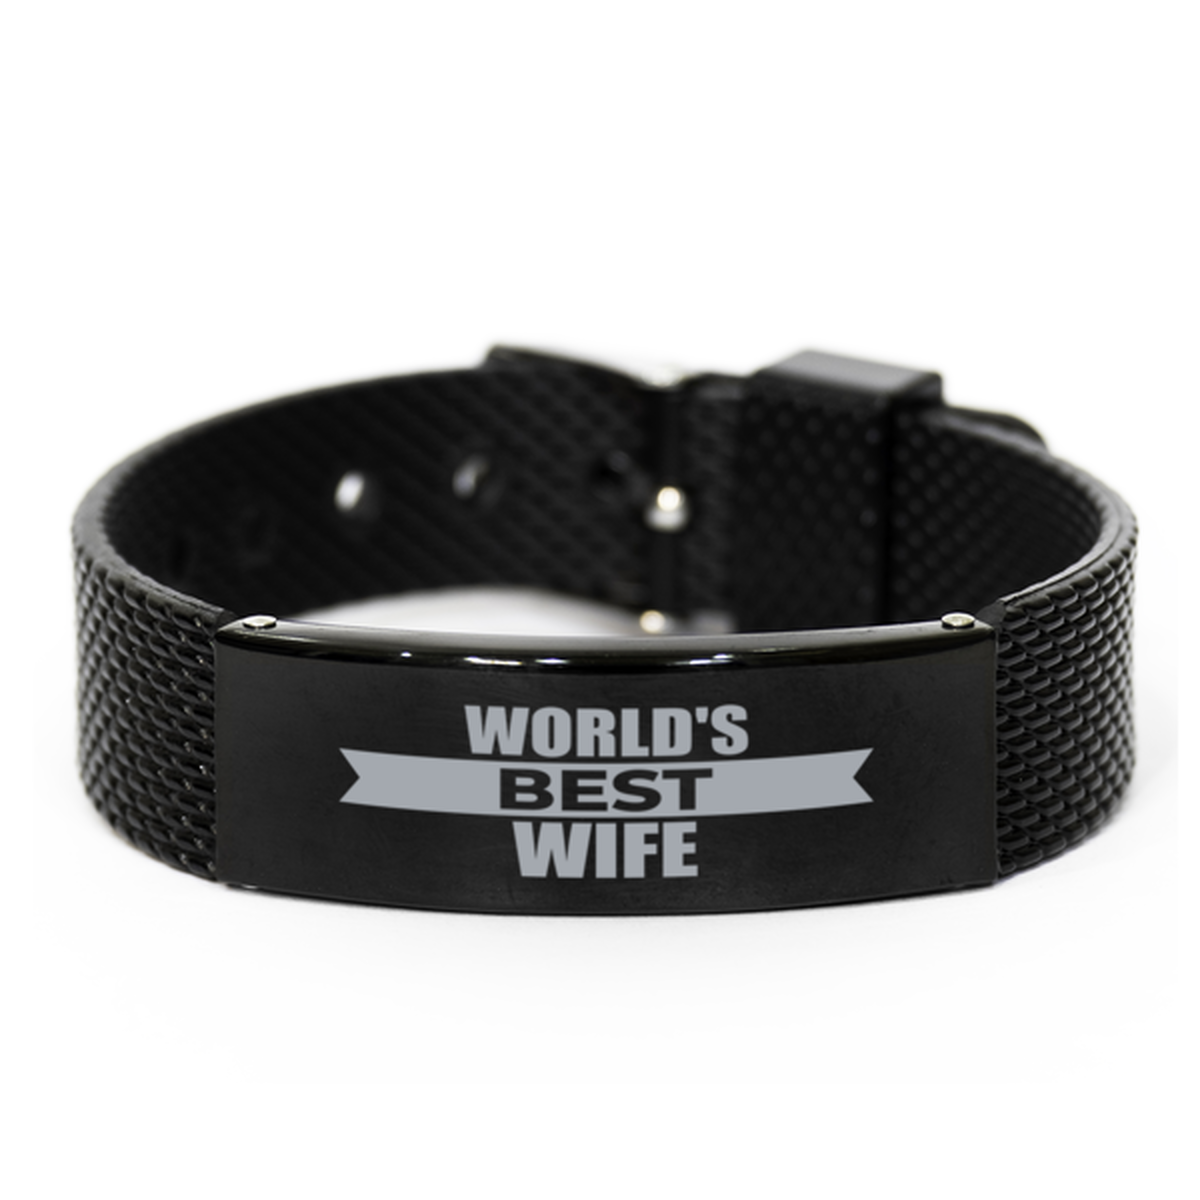 World's Best Wife Gifts, Gag Engraved Bracelet For Wife, Best Family Gifts For Women